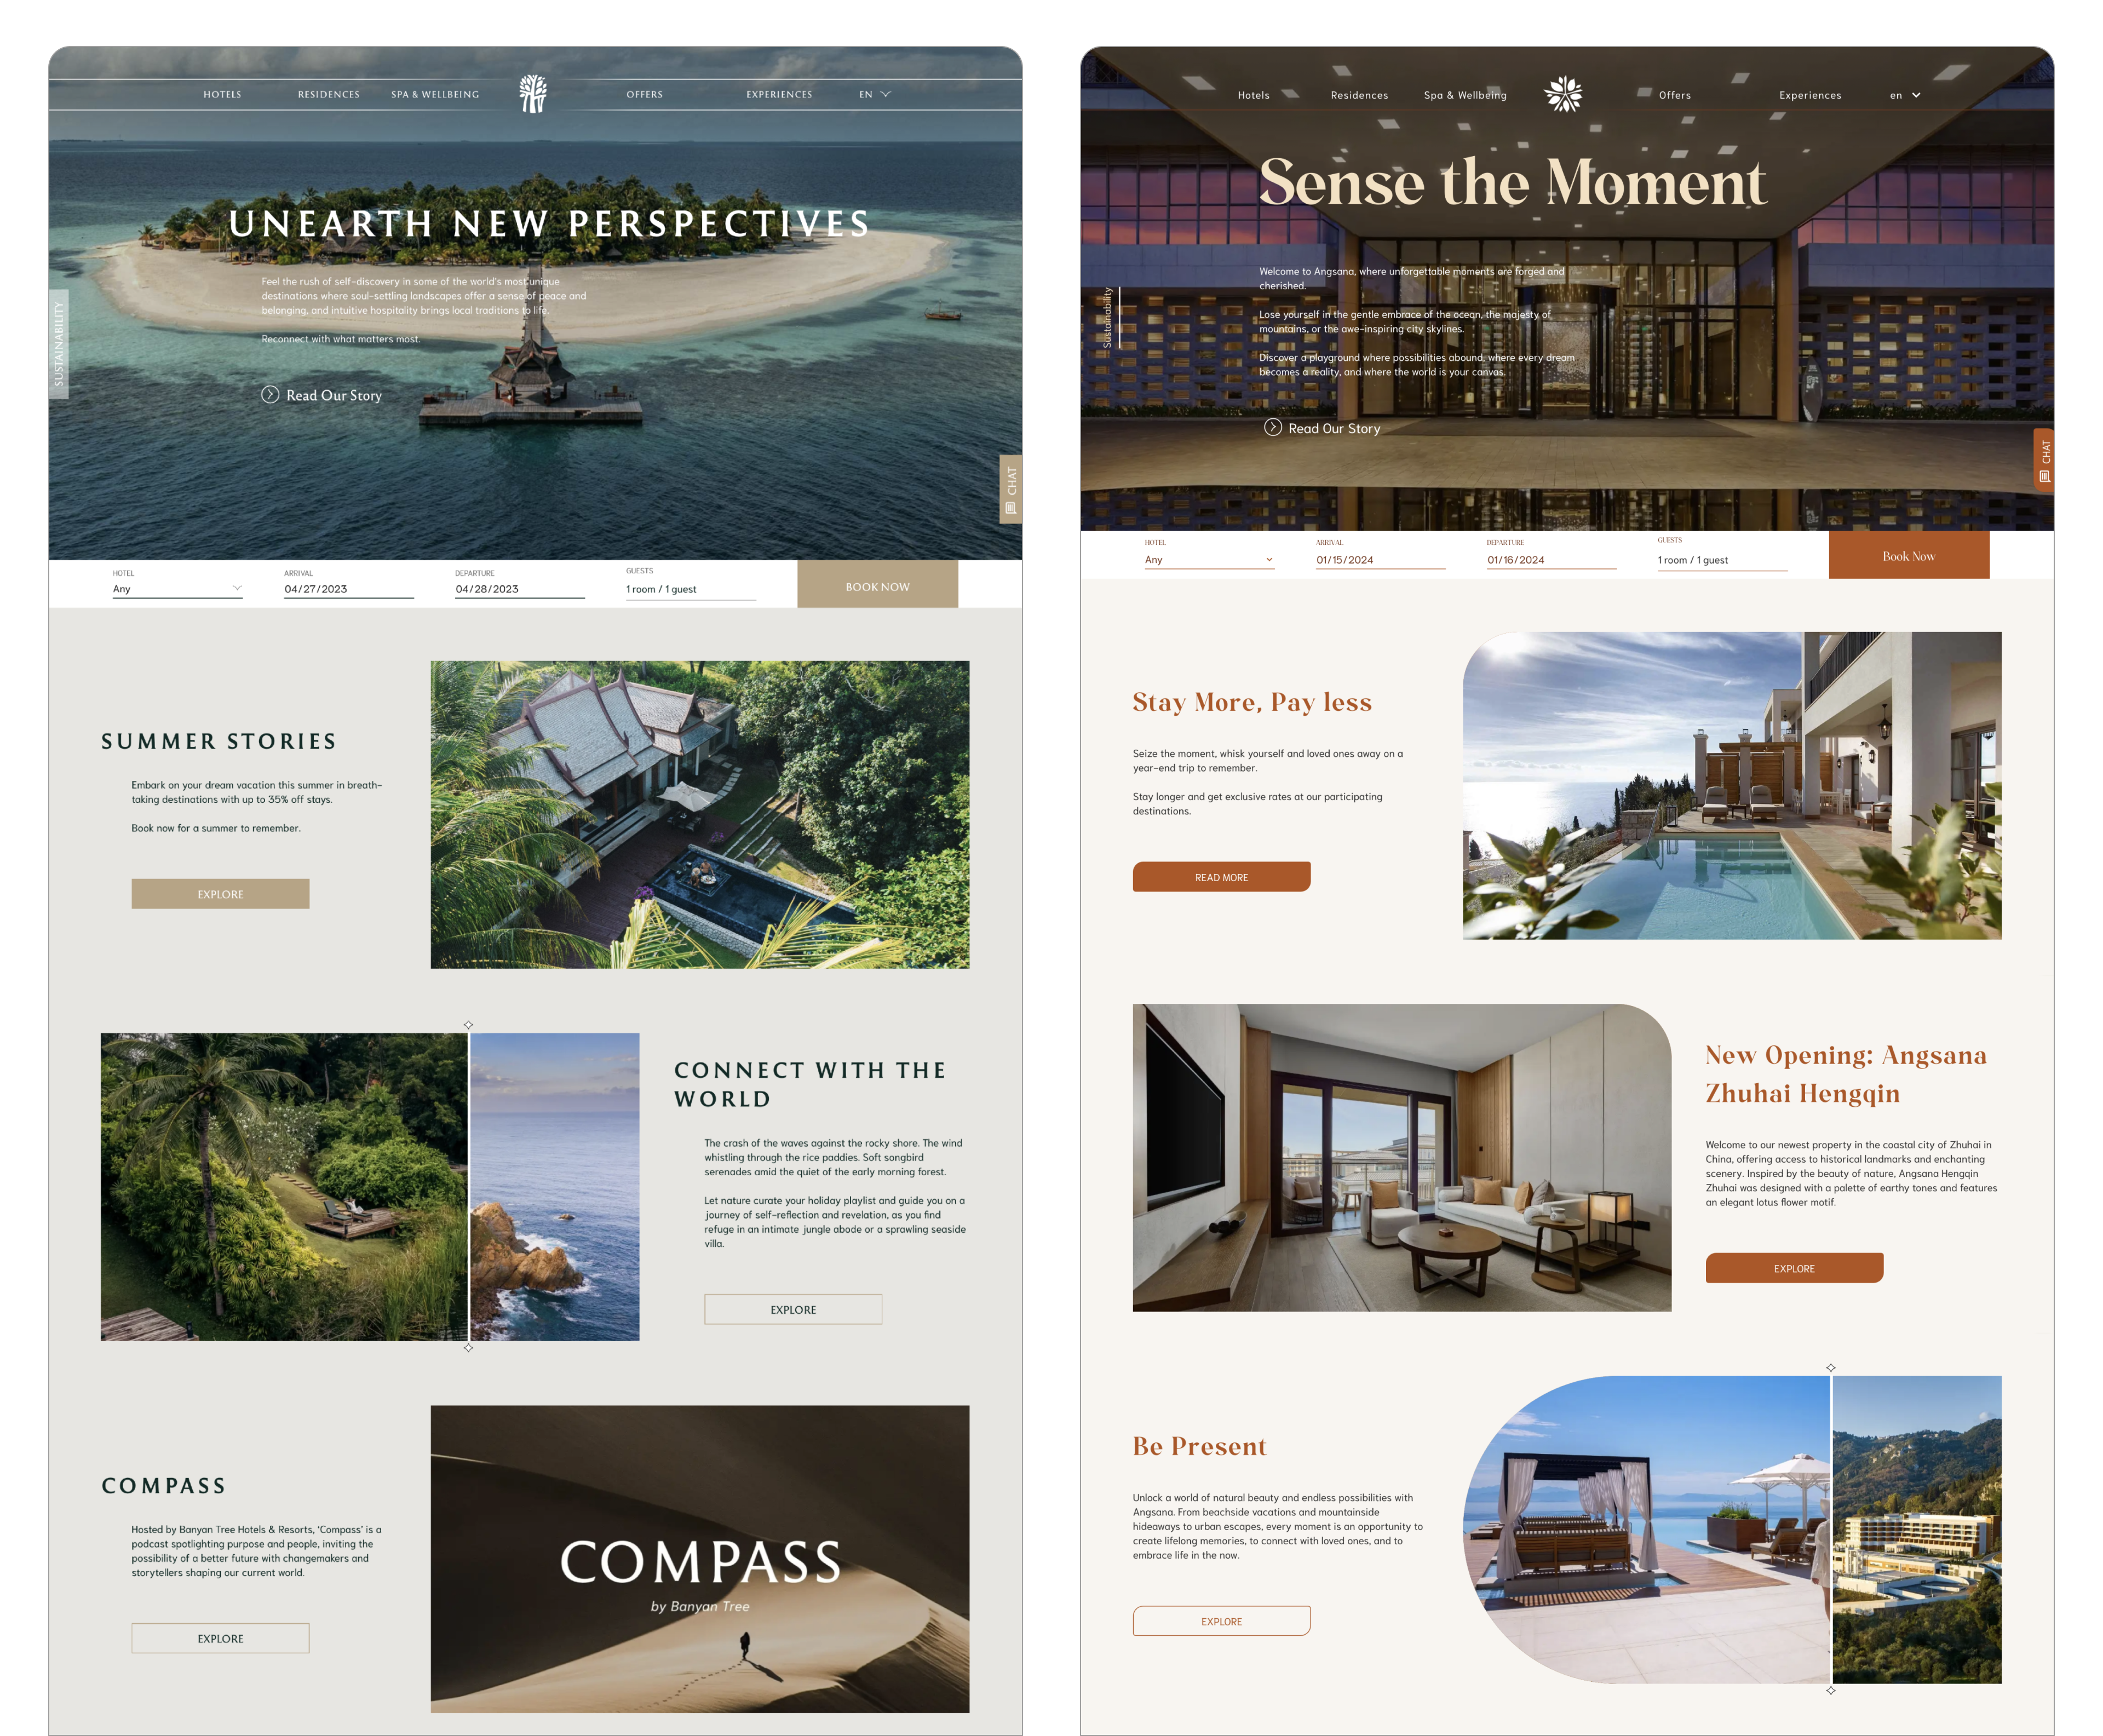 End result of Component-based UI UX Development for Banyan Tree and Angsana